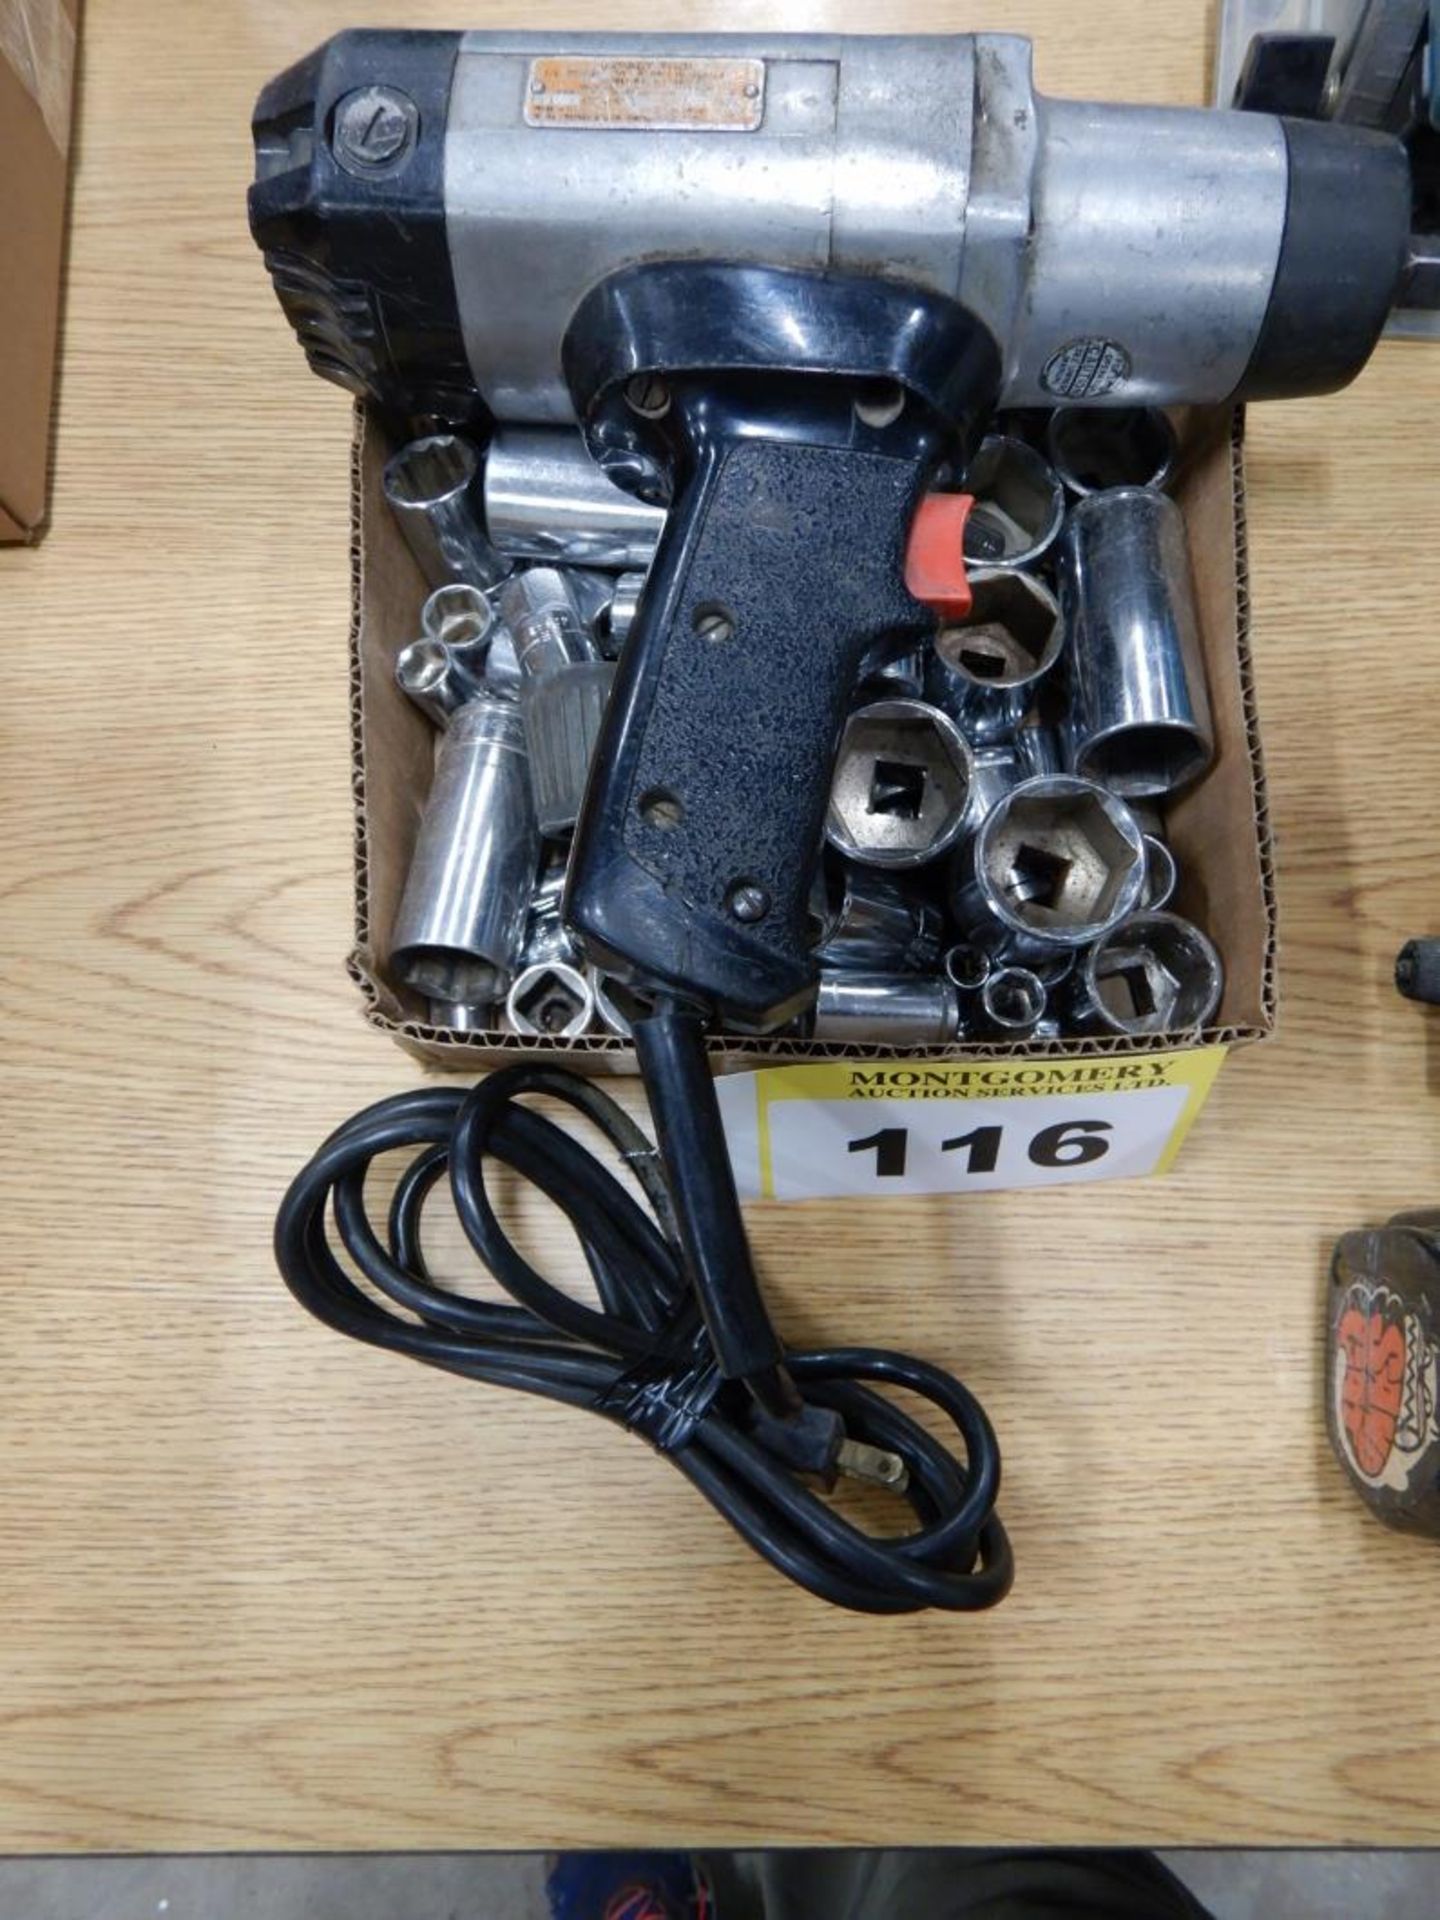 CRAFTSMAN ELECTRIC IMPACT DRILL WITH ASSORTED SOCKETS, 1/2" DRIVE - Image 2 of 2